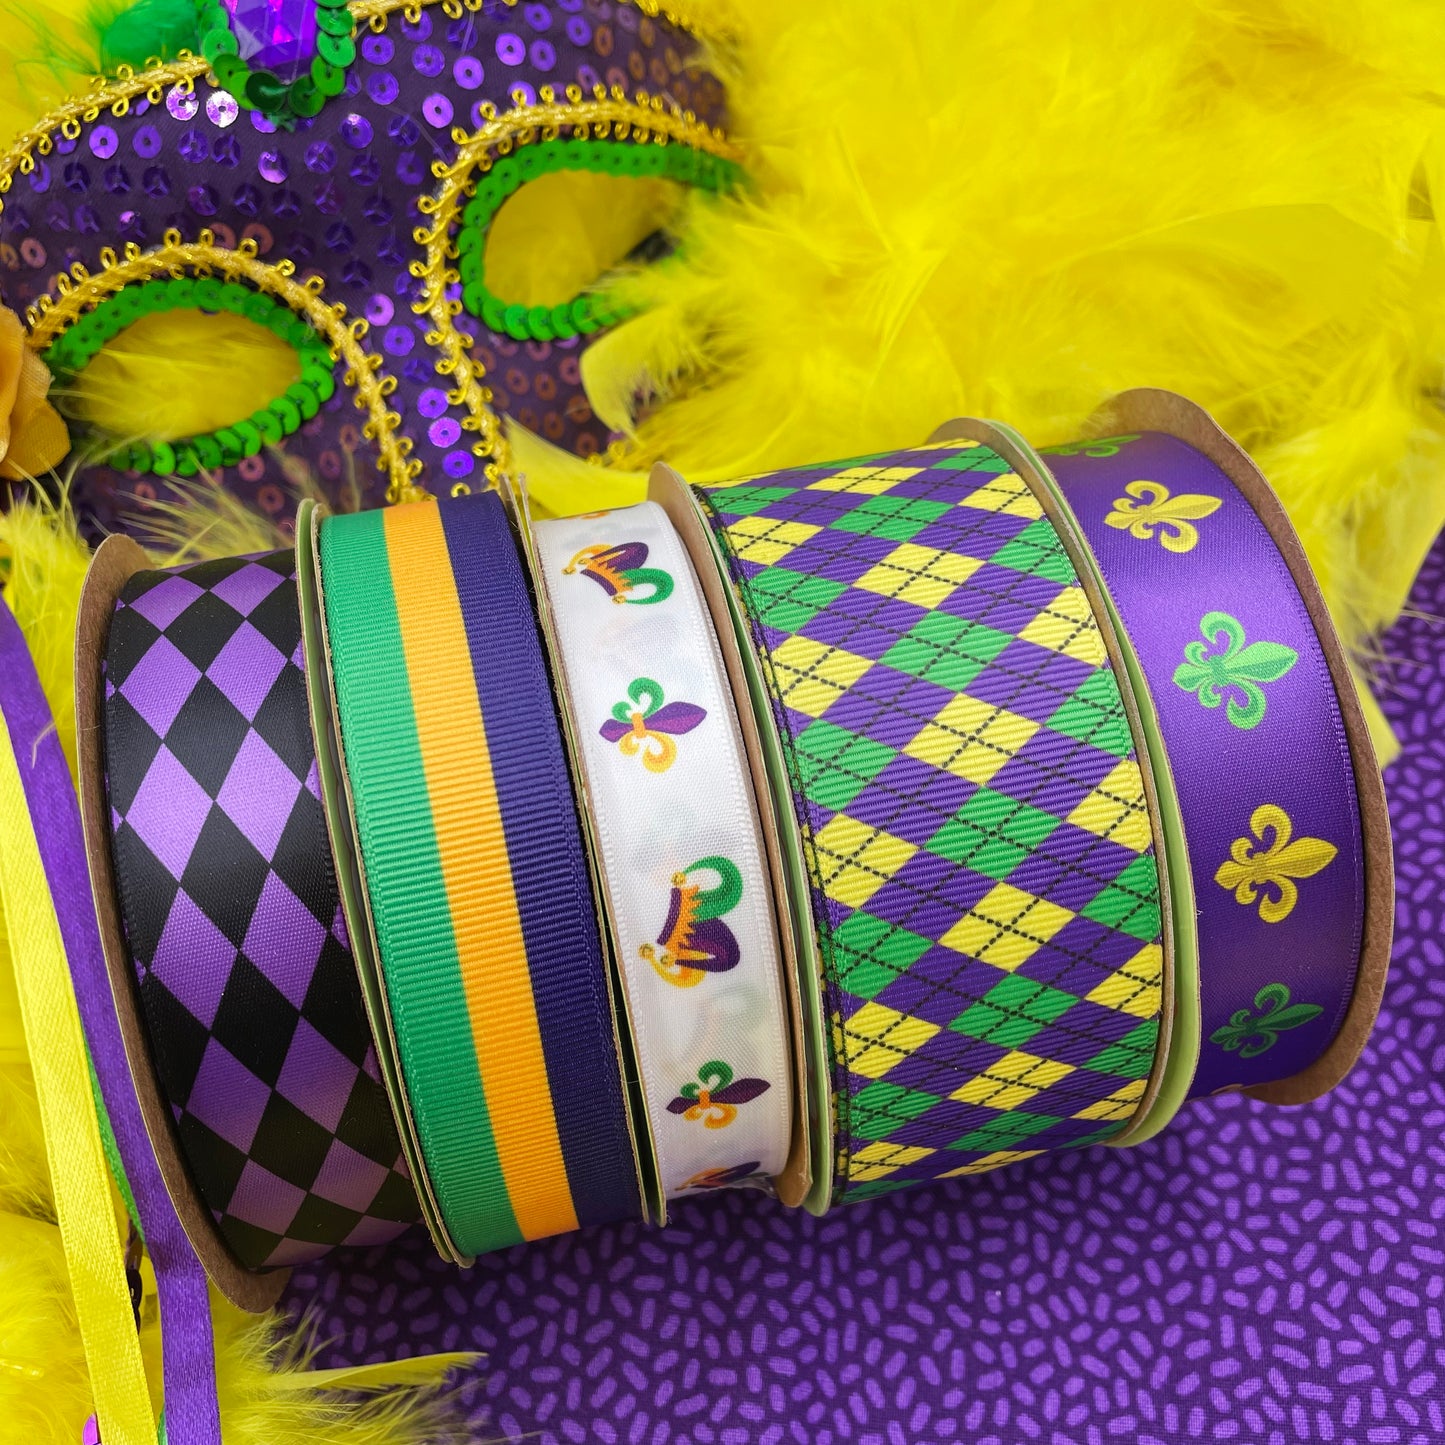 Mardi Gras Ribbon in argyle in yellow, green, purple and white printed on 1.5" white grosgrain 1